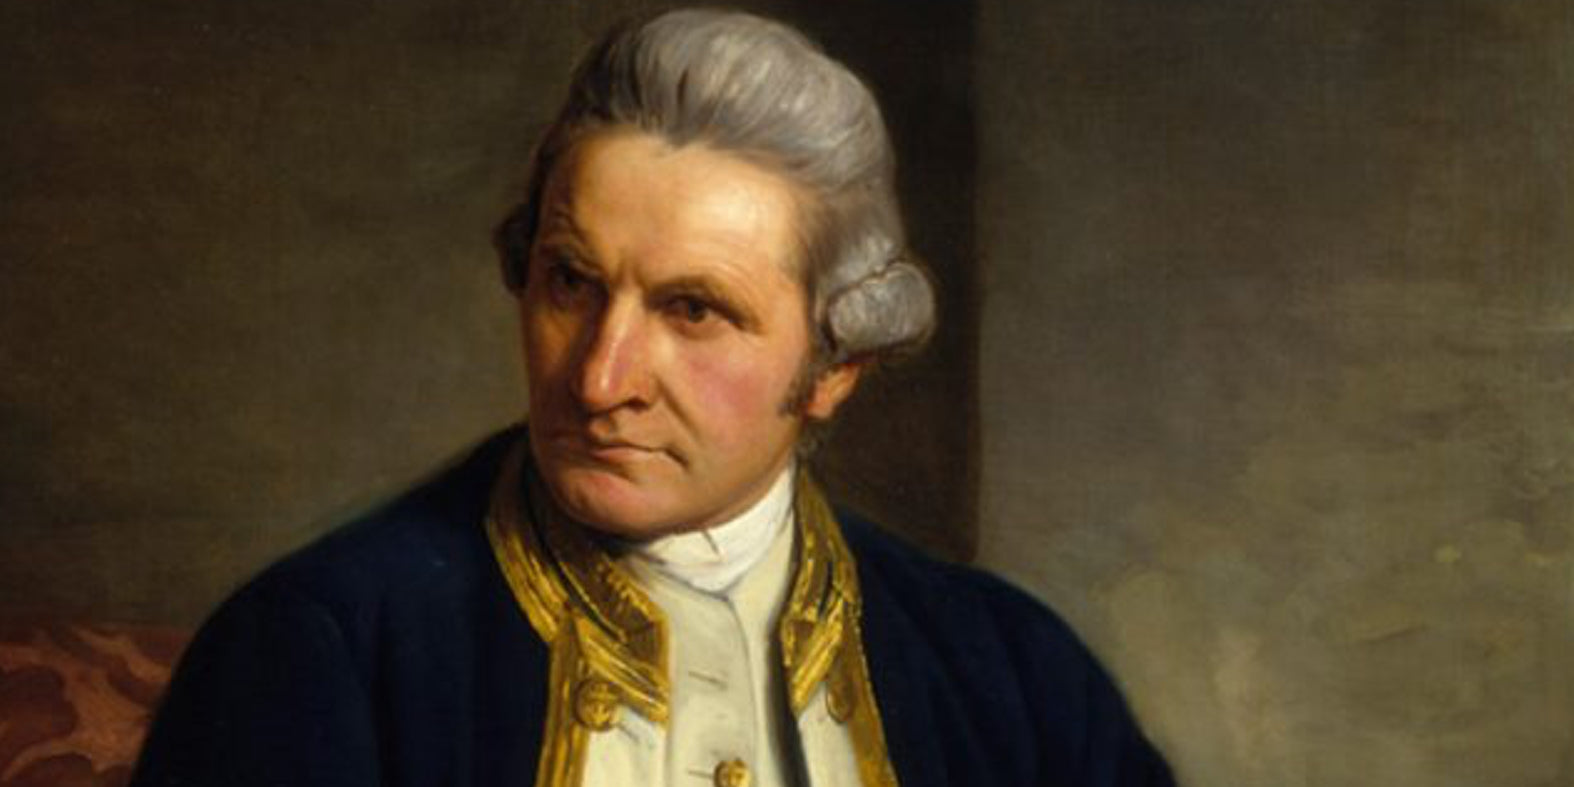 Captain James Cook: from Whitby to the Southern Hemisphere